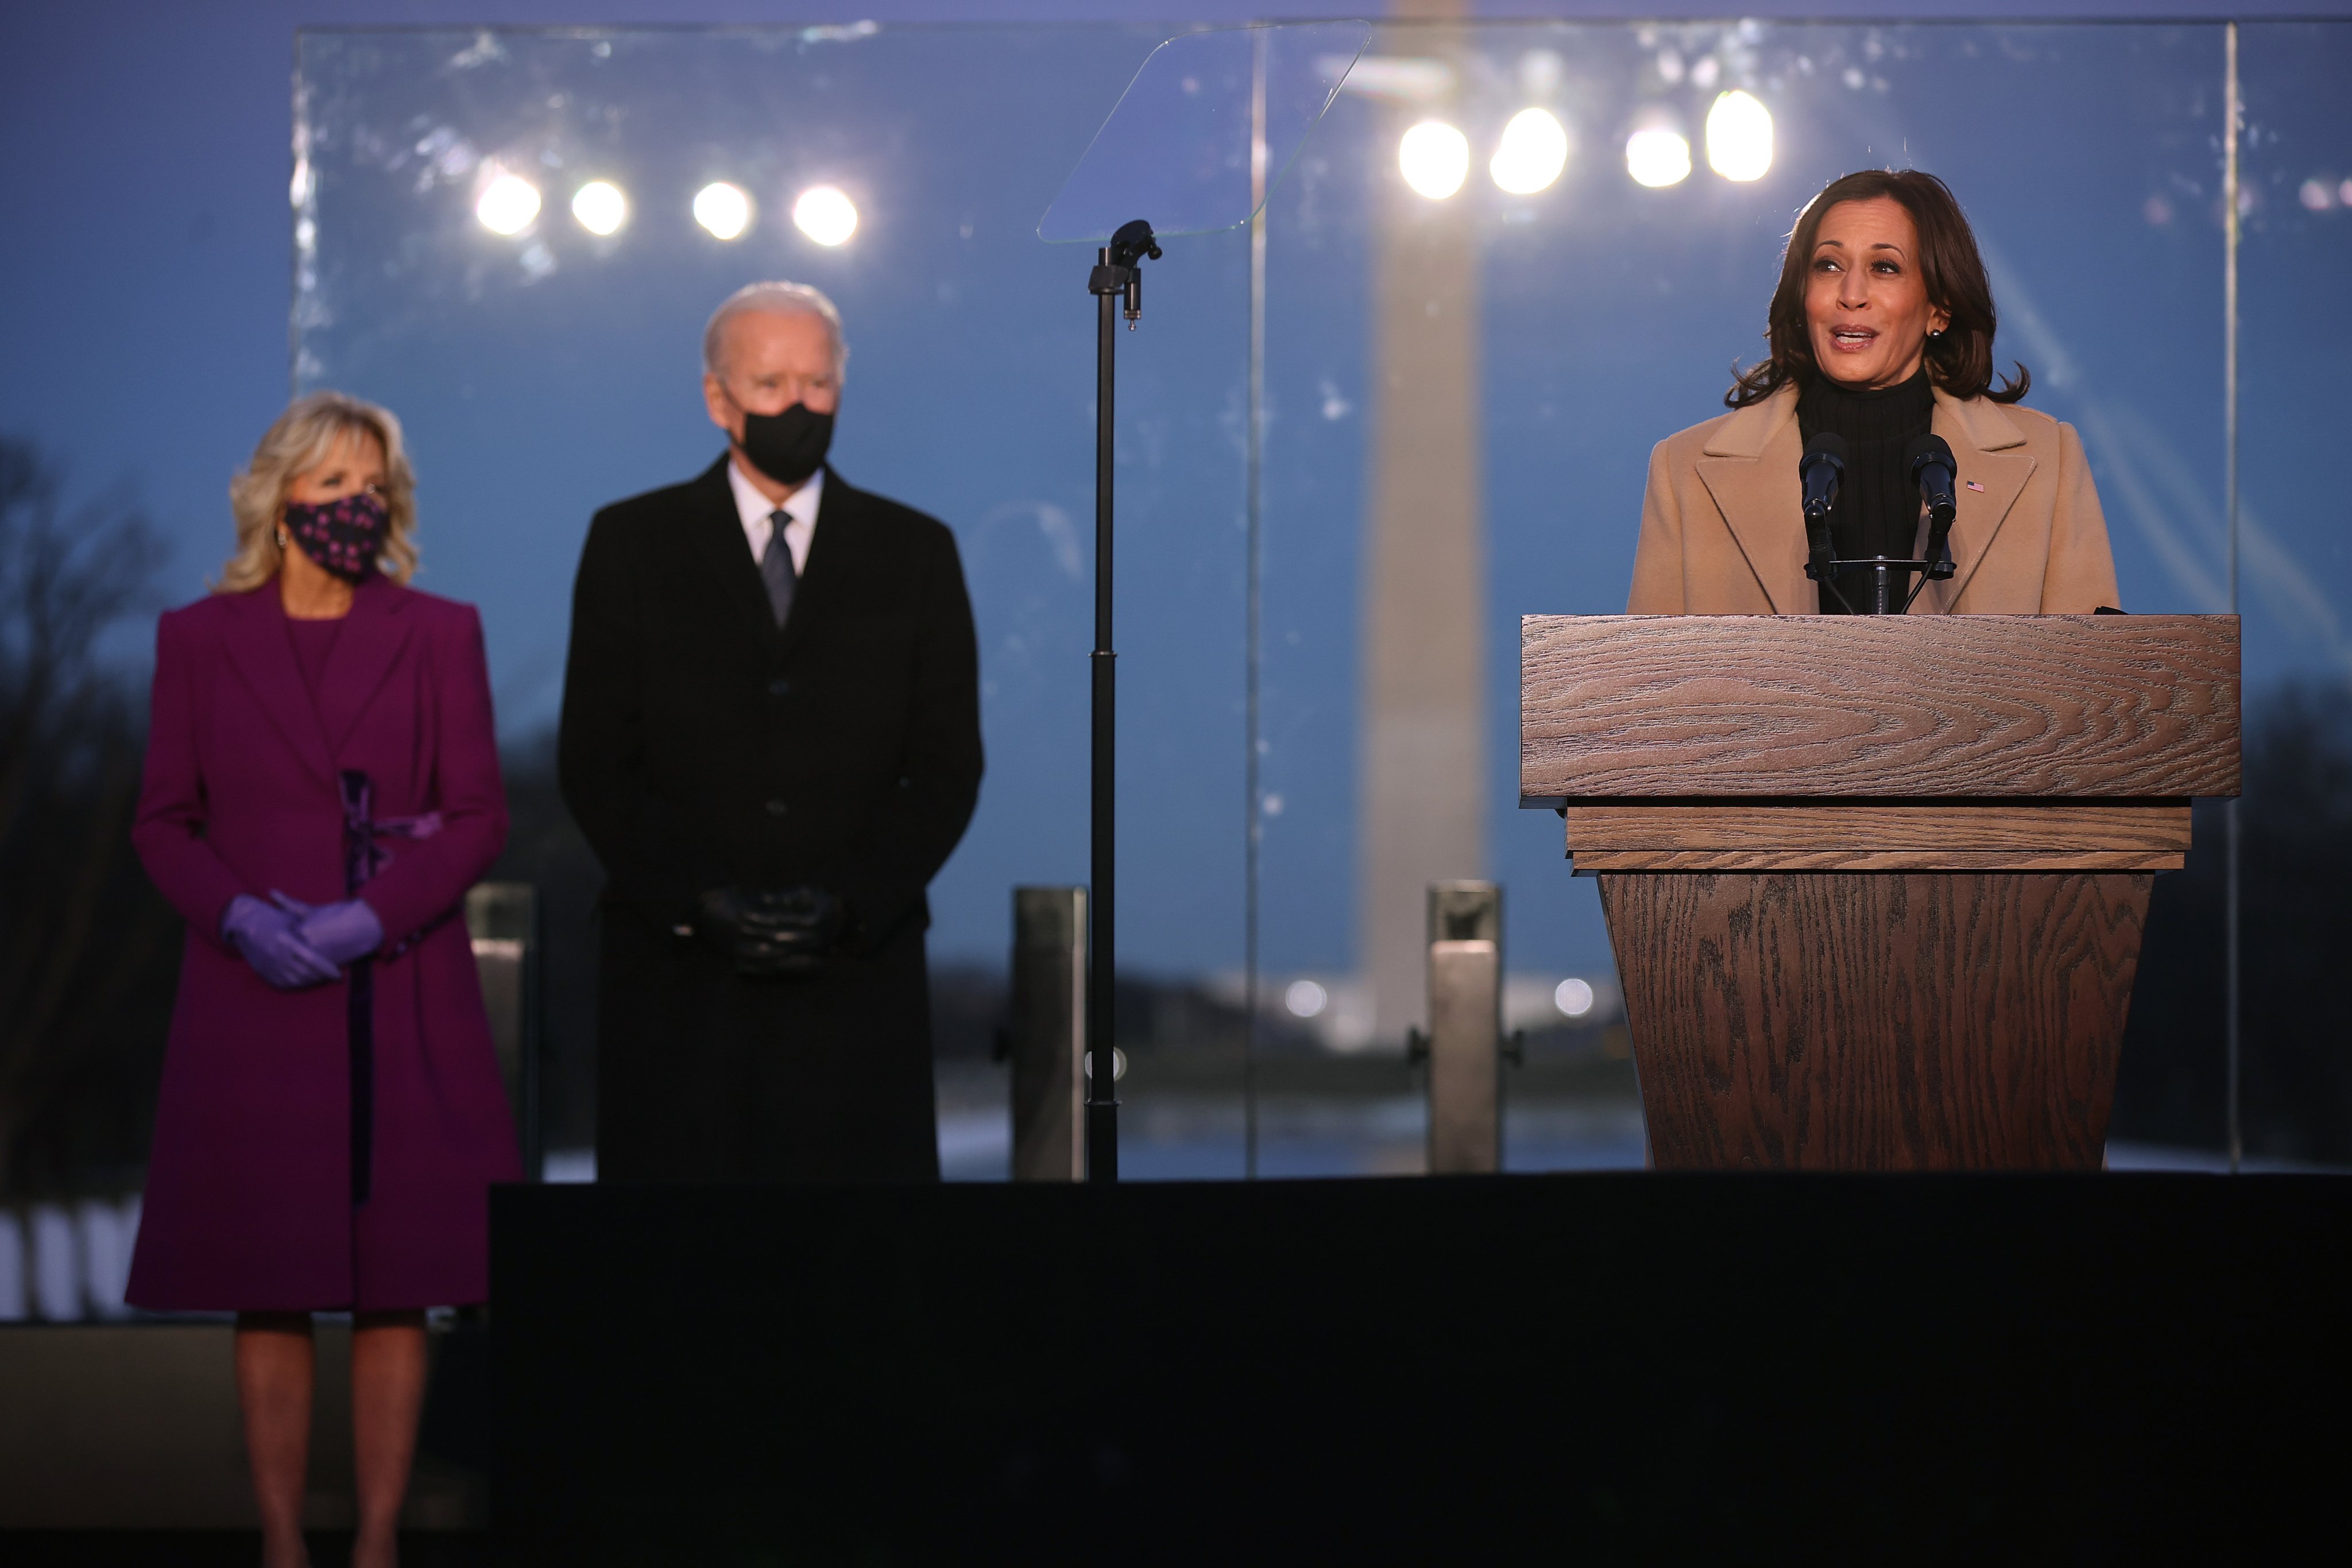 COVID-19 Memorial Service Held In Washington On The Eve Of Biden&#039;s Inauguration